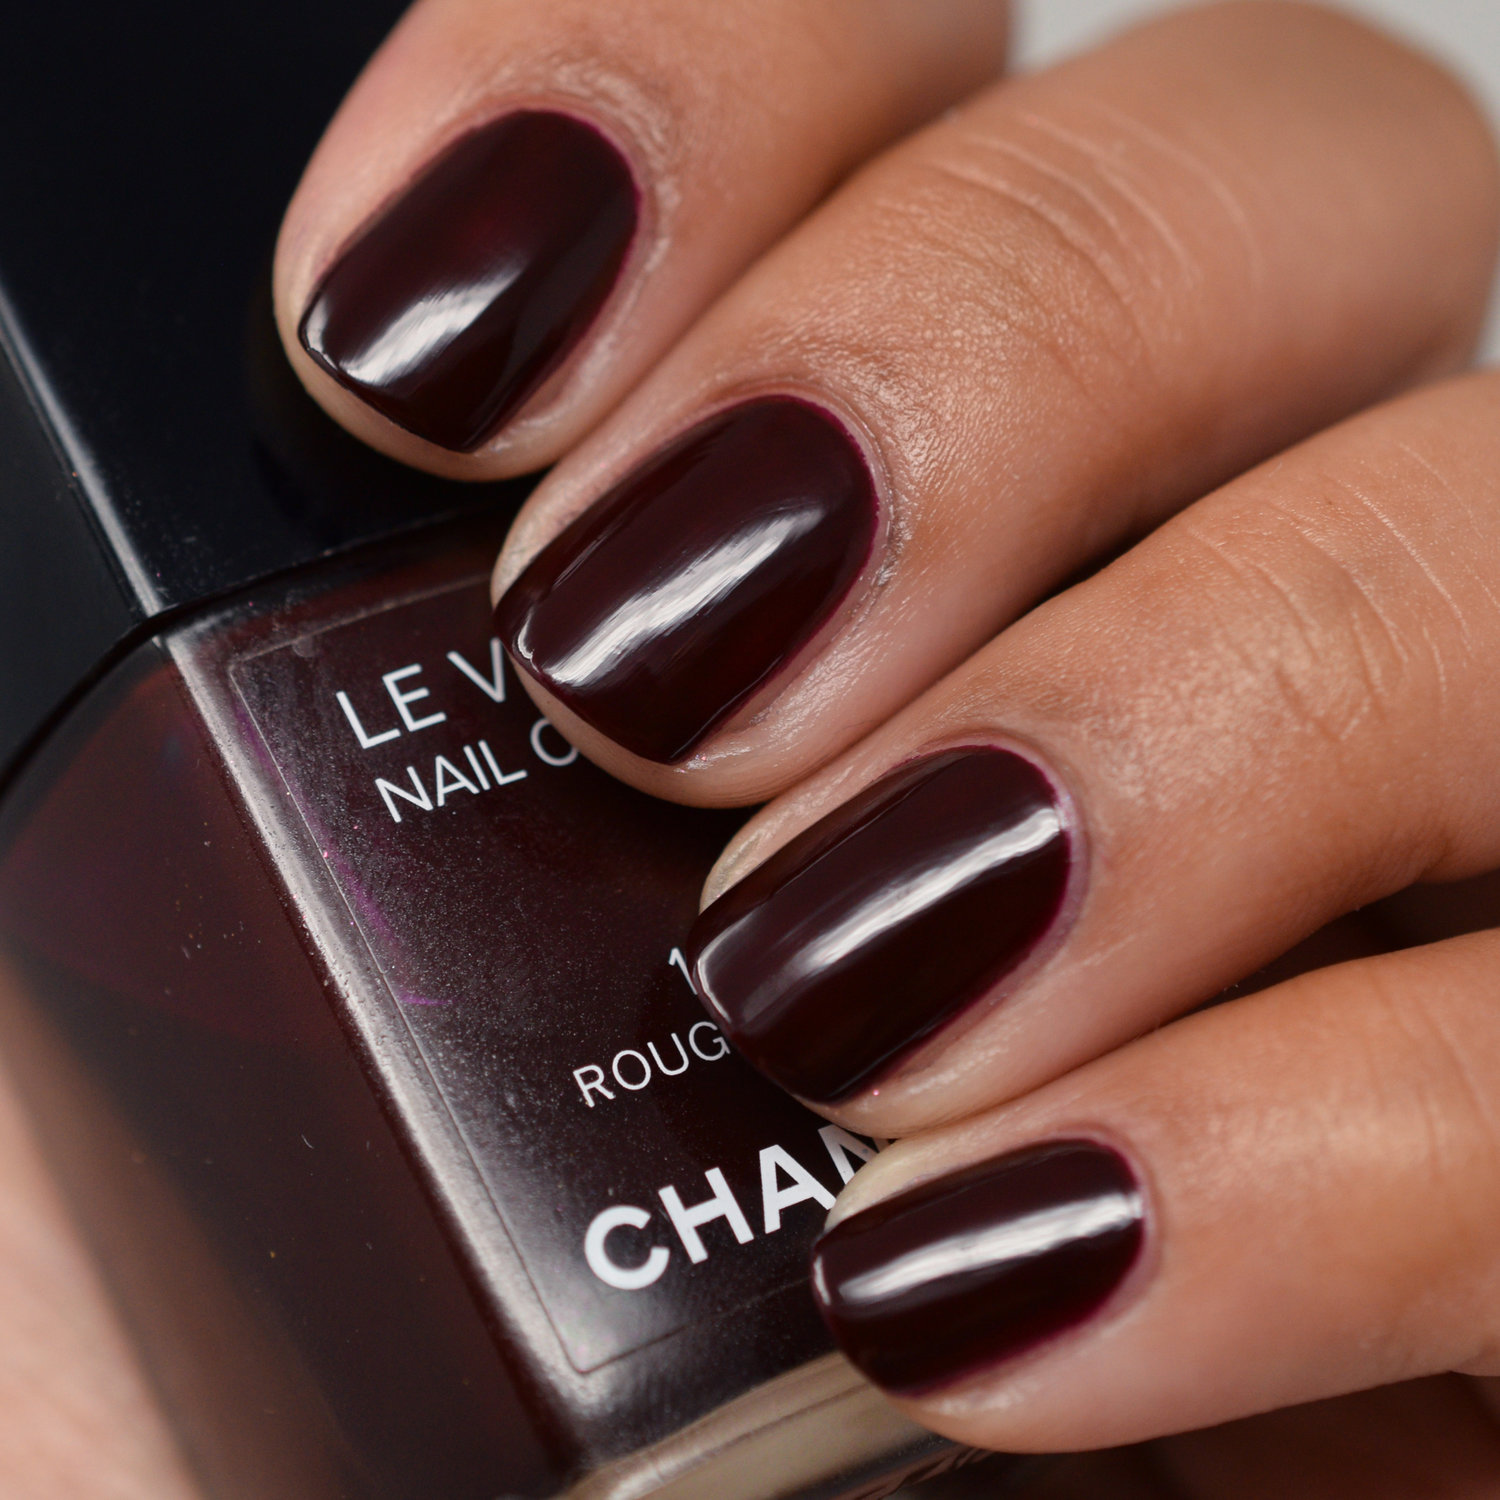 Chanel Le Top Coat Lame Rouge Noir Holidays 2015 review – Bay Area  Fashionista